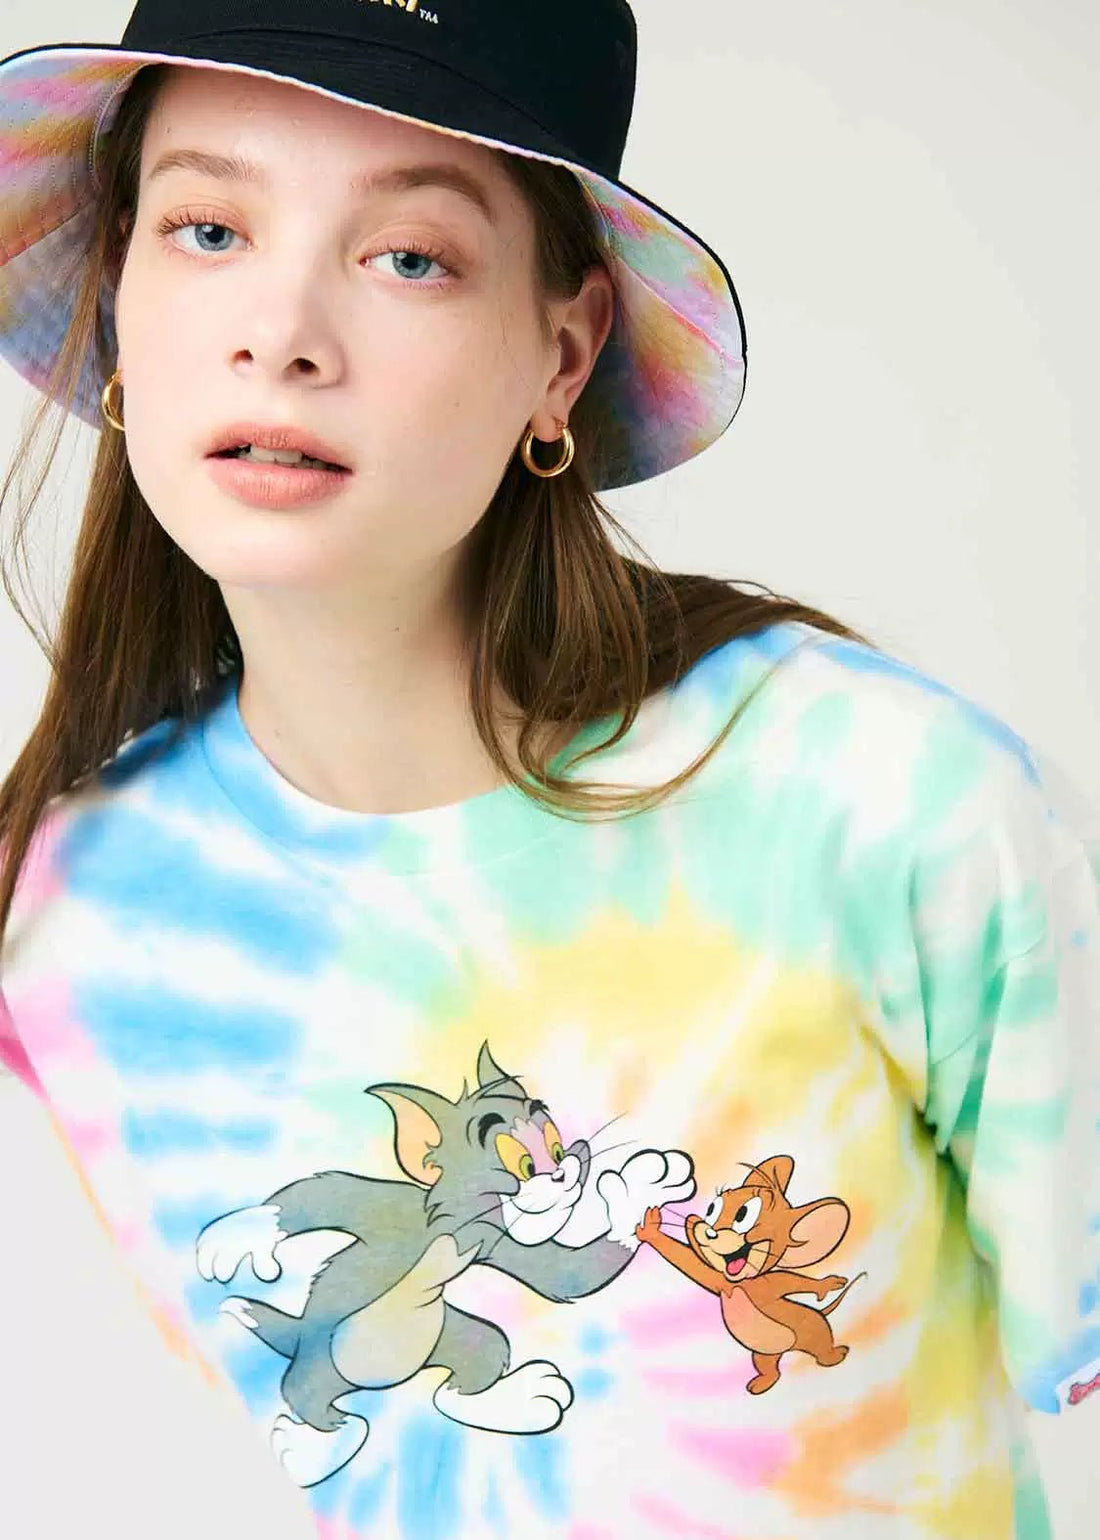 Tom and Jerry Tie Dye T - Shirts for Men and Women - Fun and Comfortable Casual Wear - Seakoff